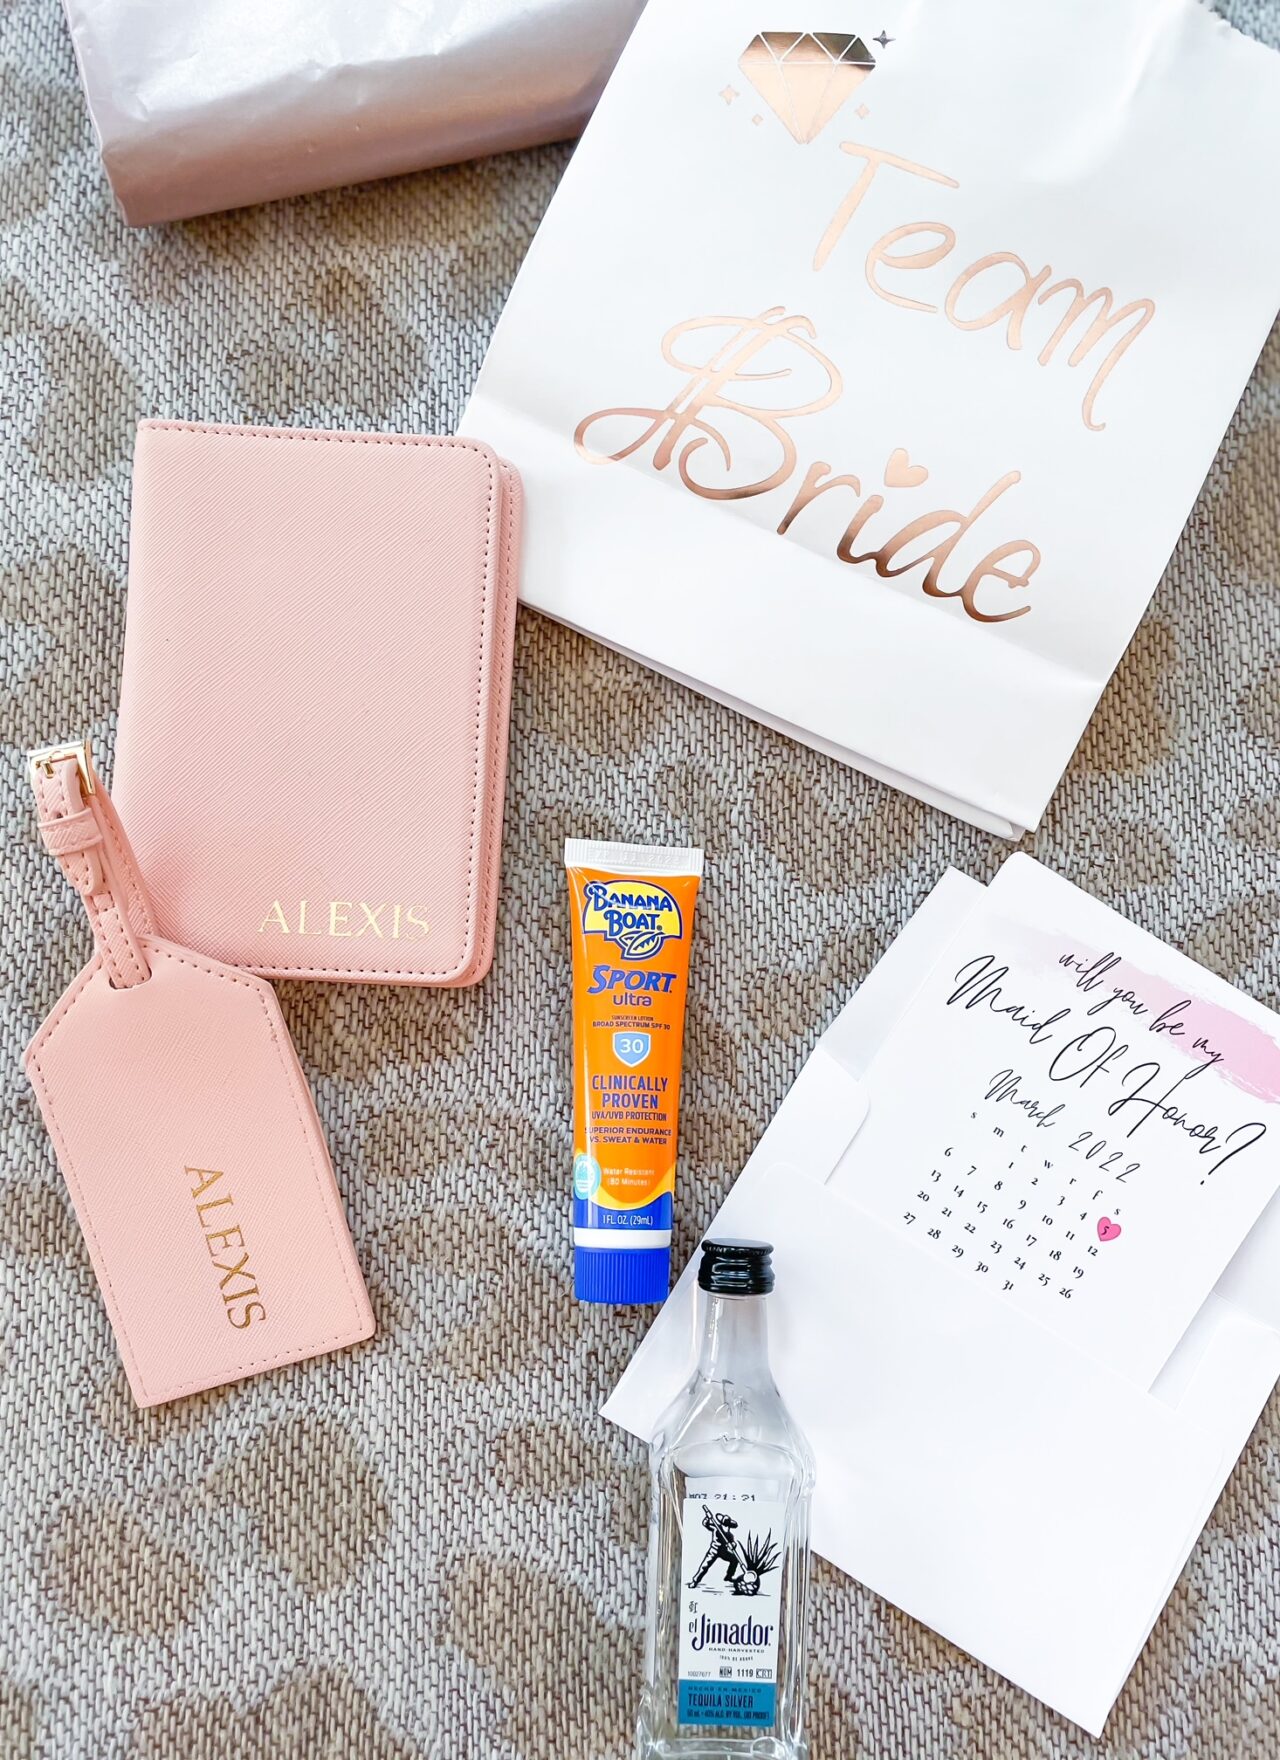 lifestyle and fashion bloggers alexis and samantha belbel share bridesmaids gift idea including stackable rings, personalized passport covers, and more | adoubledose.com